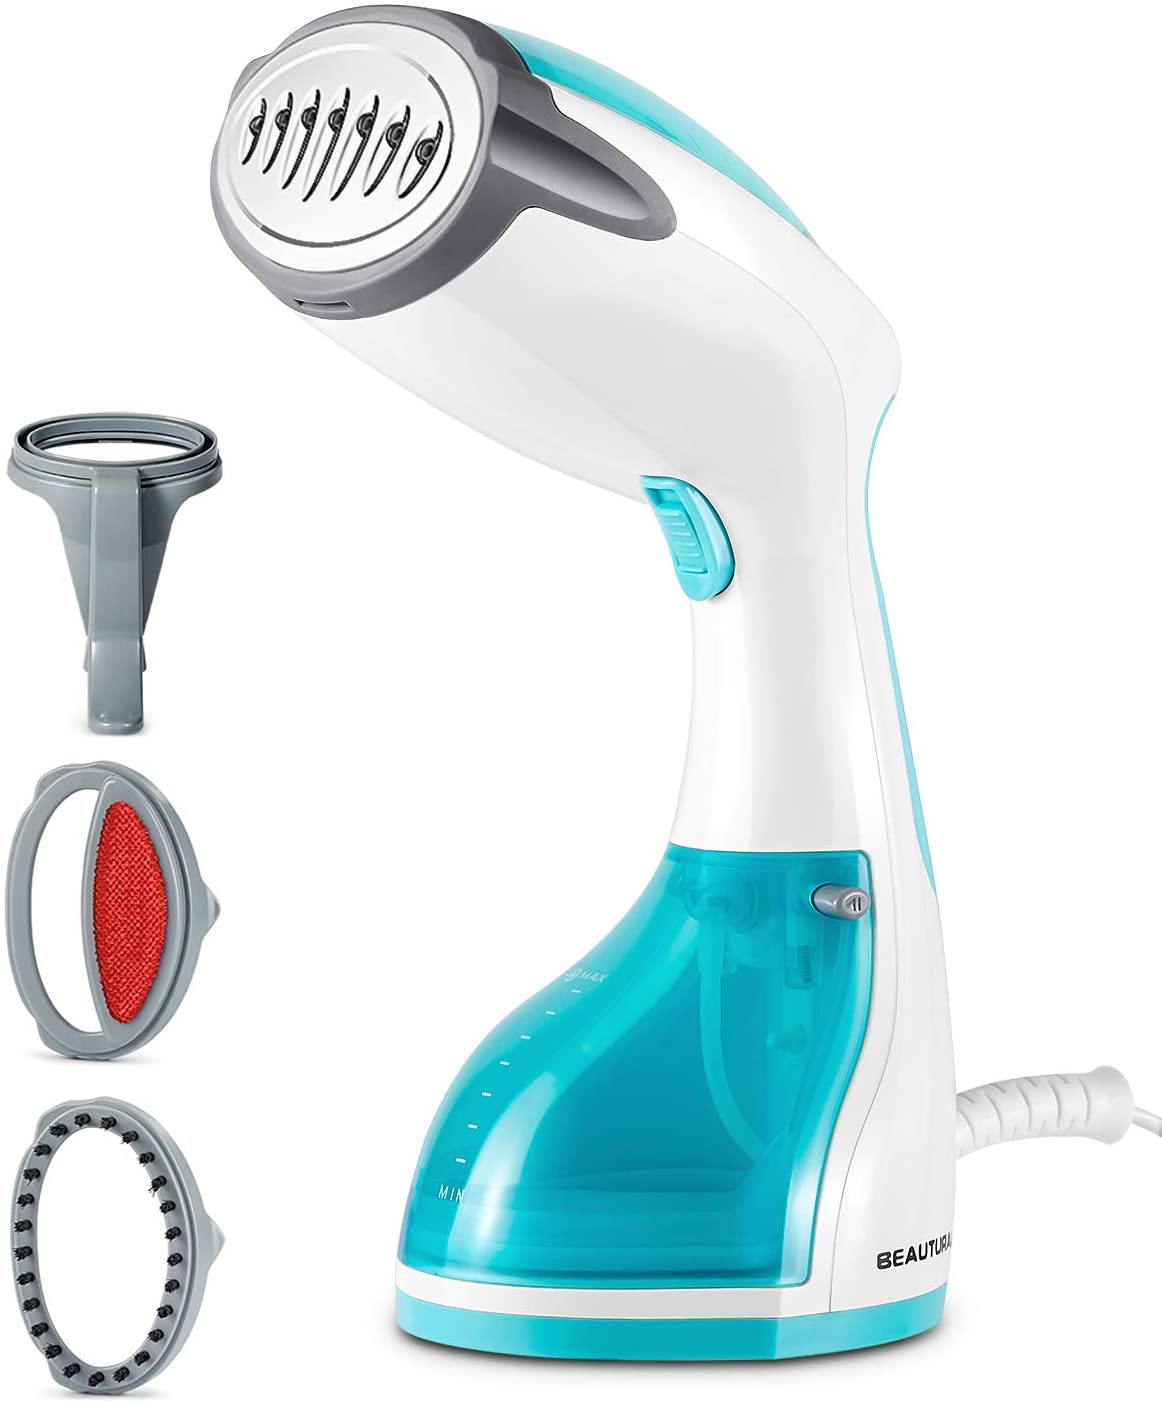 Beautural Anti-Leaking Clothes Continuous Steamer